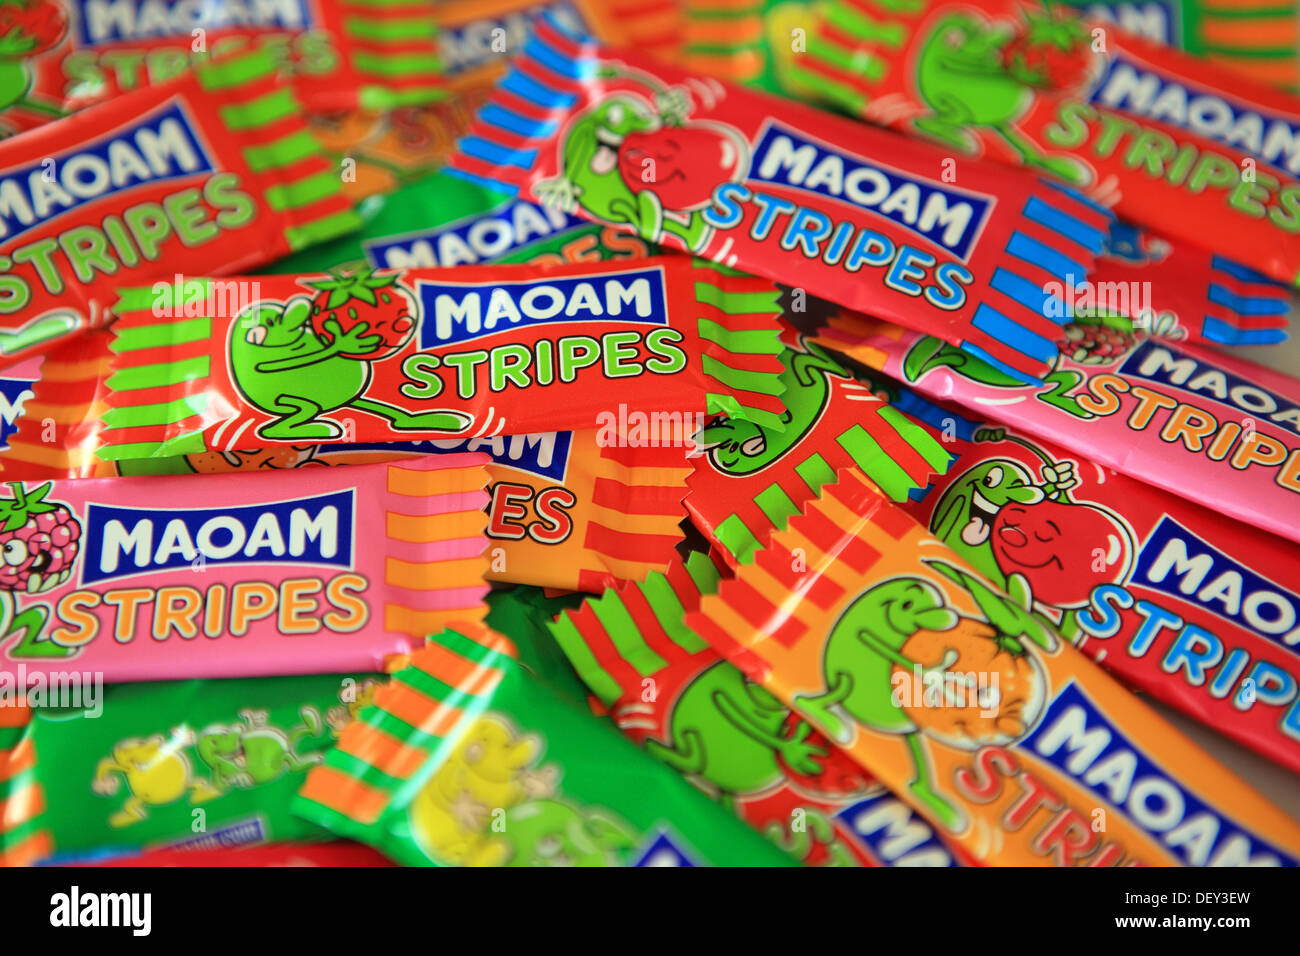 Children's fruit flavoured chewy sweets, Maoam Stripes, in colourful wrappers Stock Photo